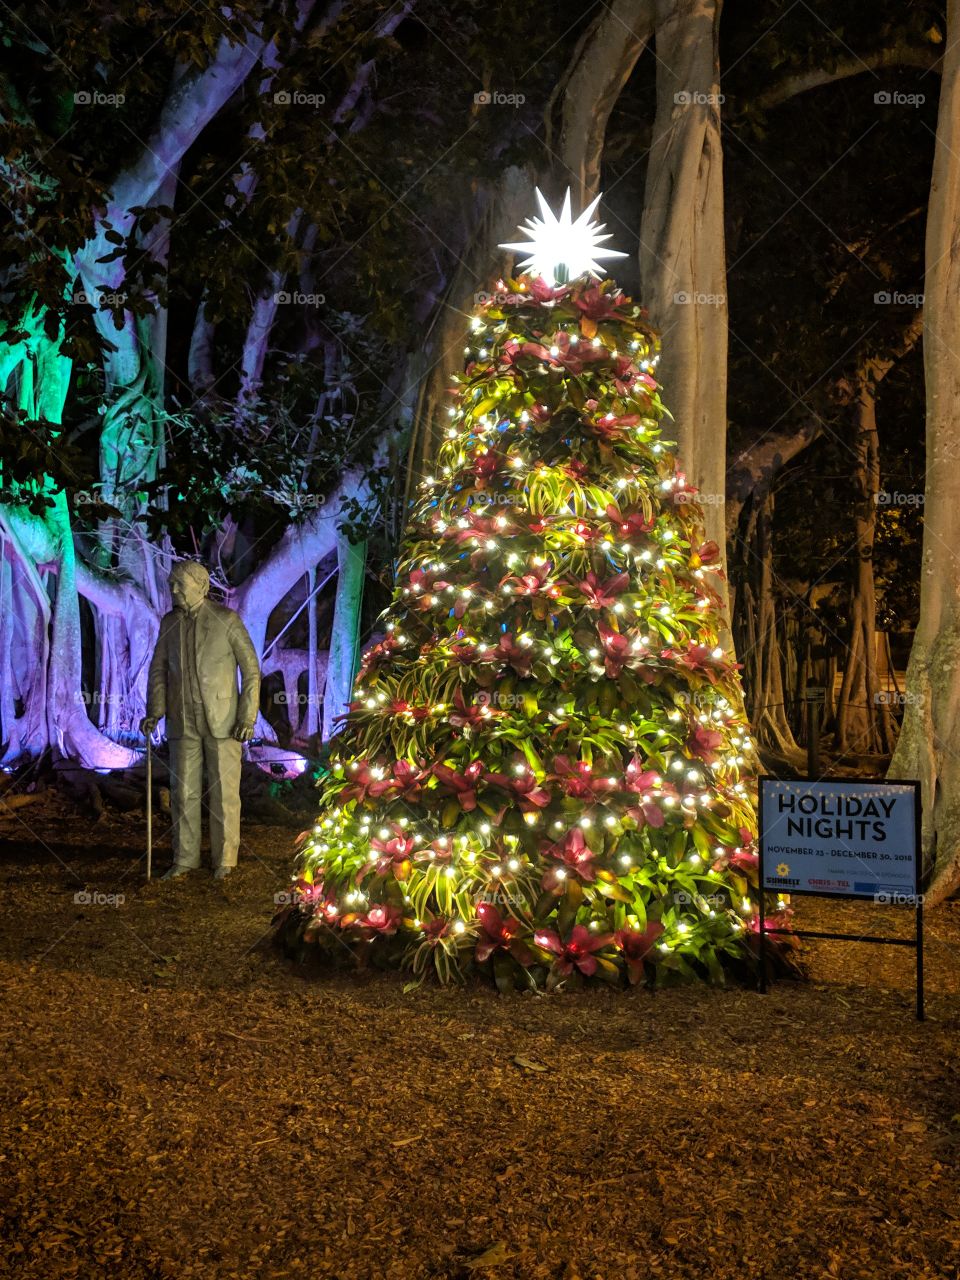 Night of Lights Christmas tree near a statue of Edison, taken 12/10/2018 at Edison's Winter Estate in Fort Meyers, FL